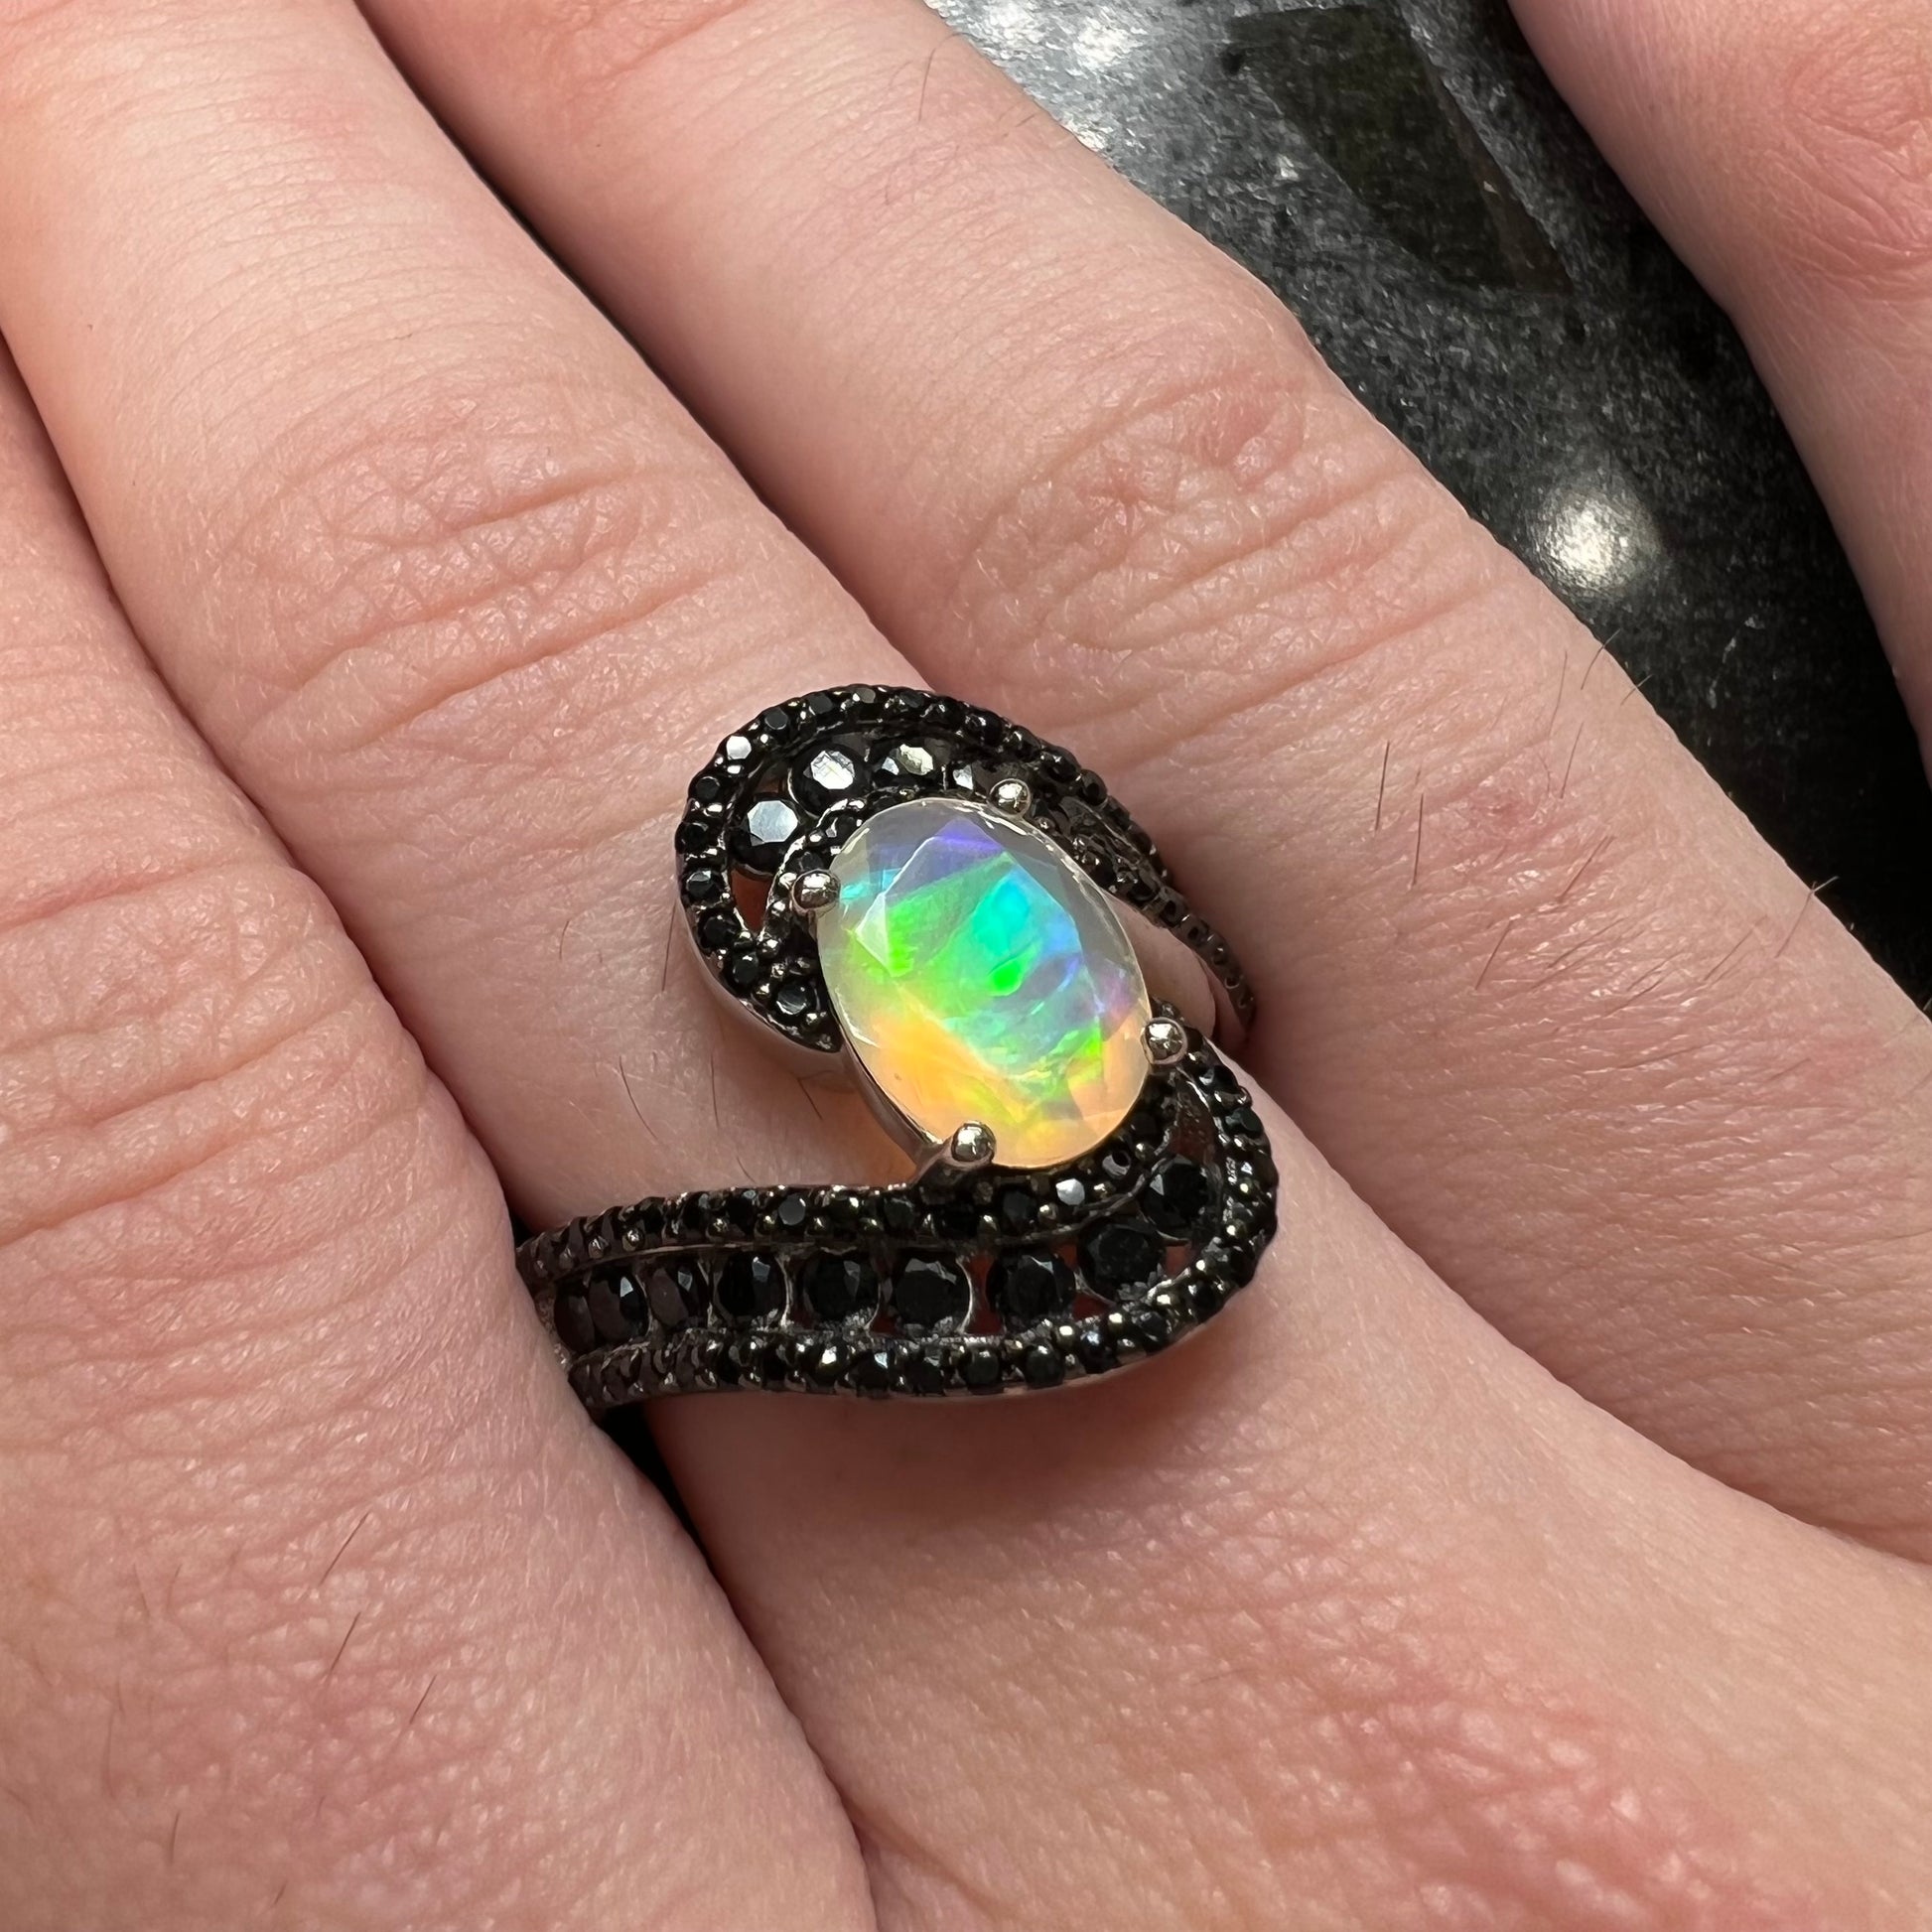 A sterling silver ring set with round black spinel stones and an oval cut, faceted Ethiopian opal.